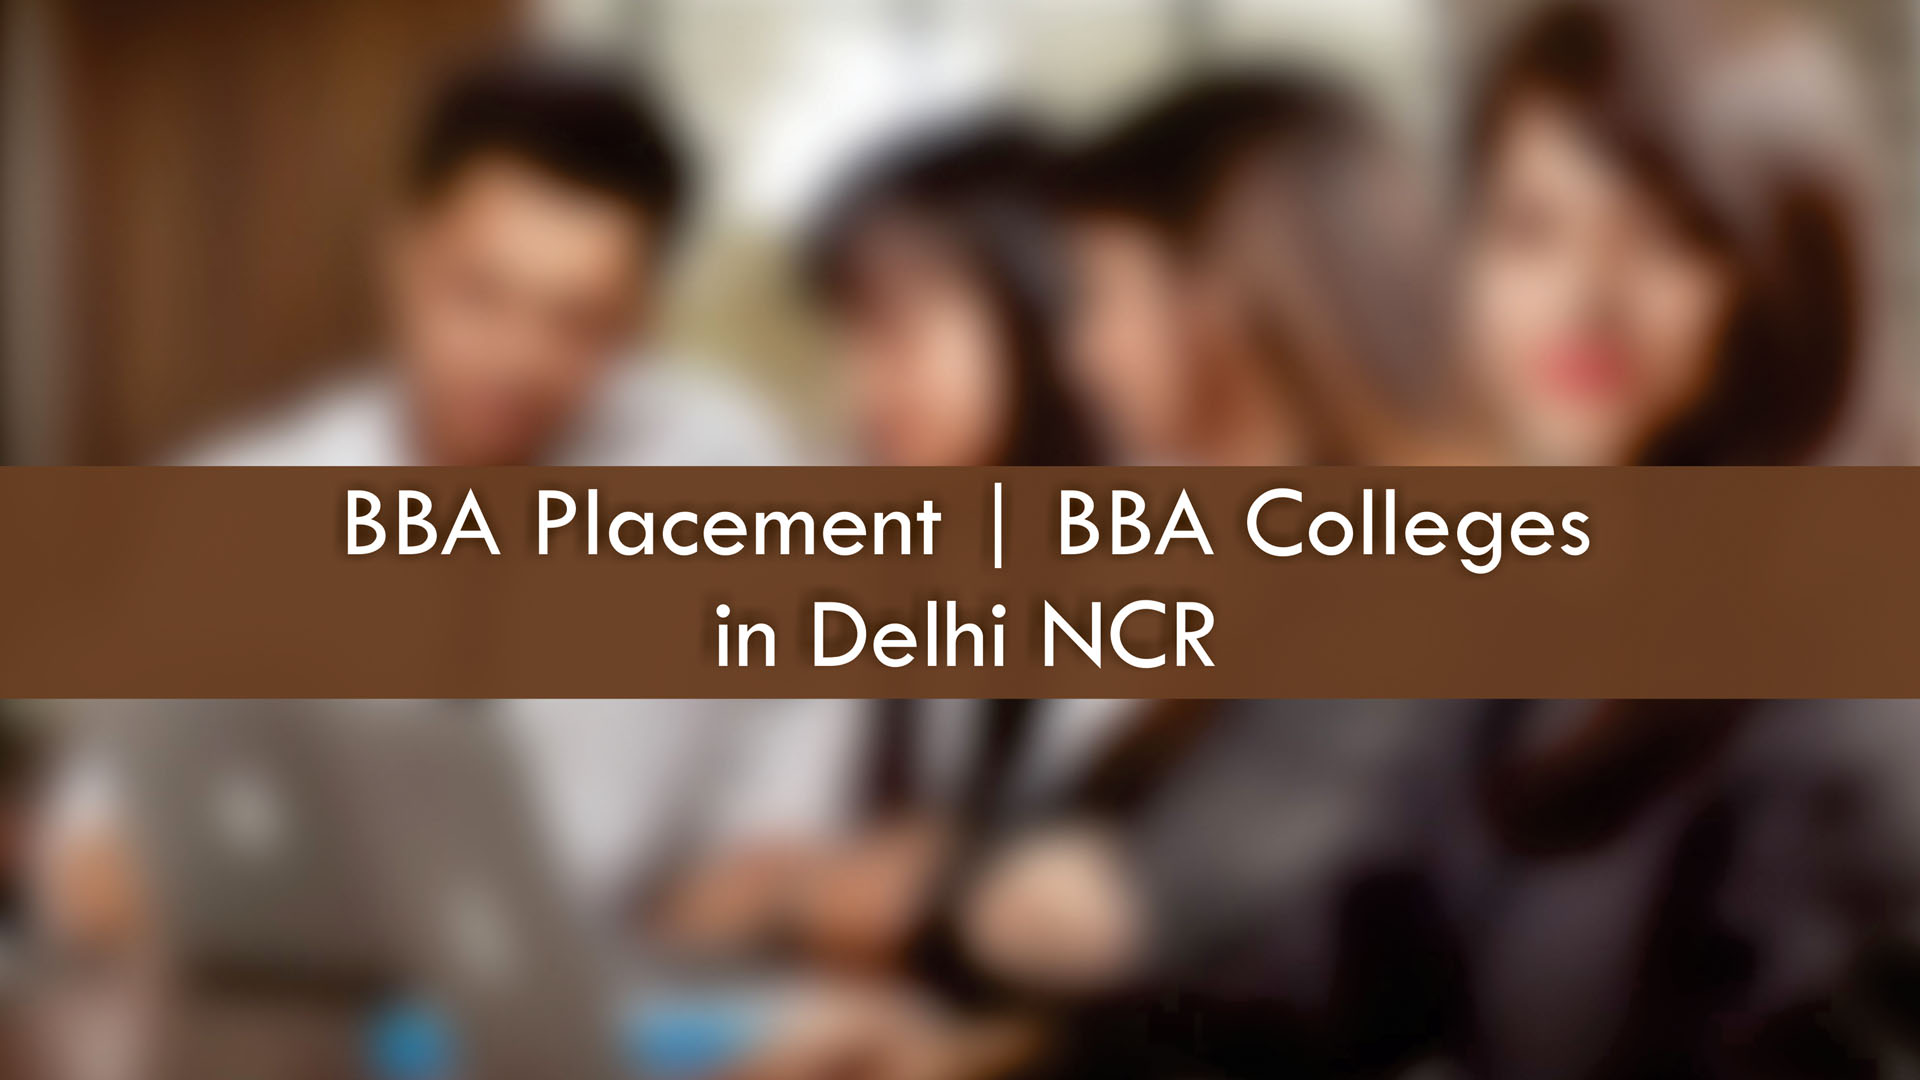 BBA placement | BBA colleges in Delhi
                        NCR